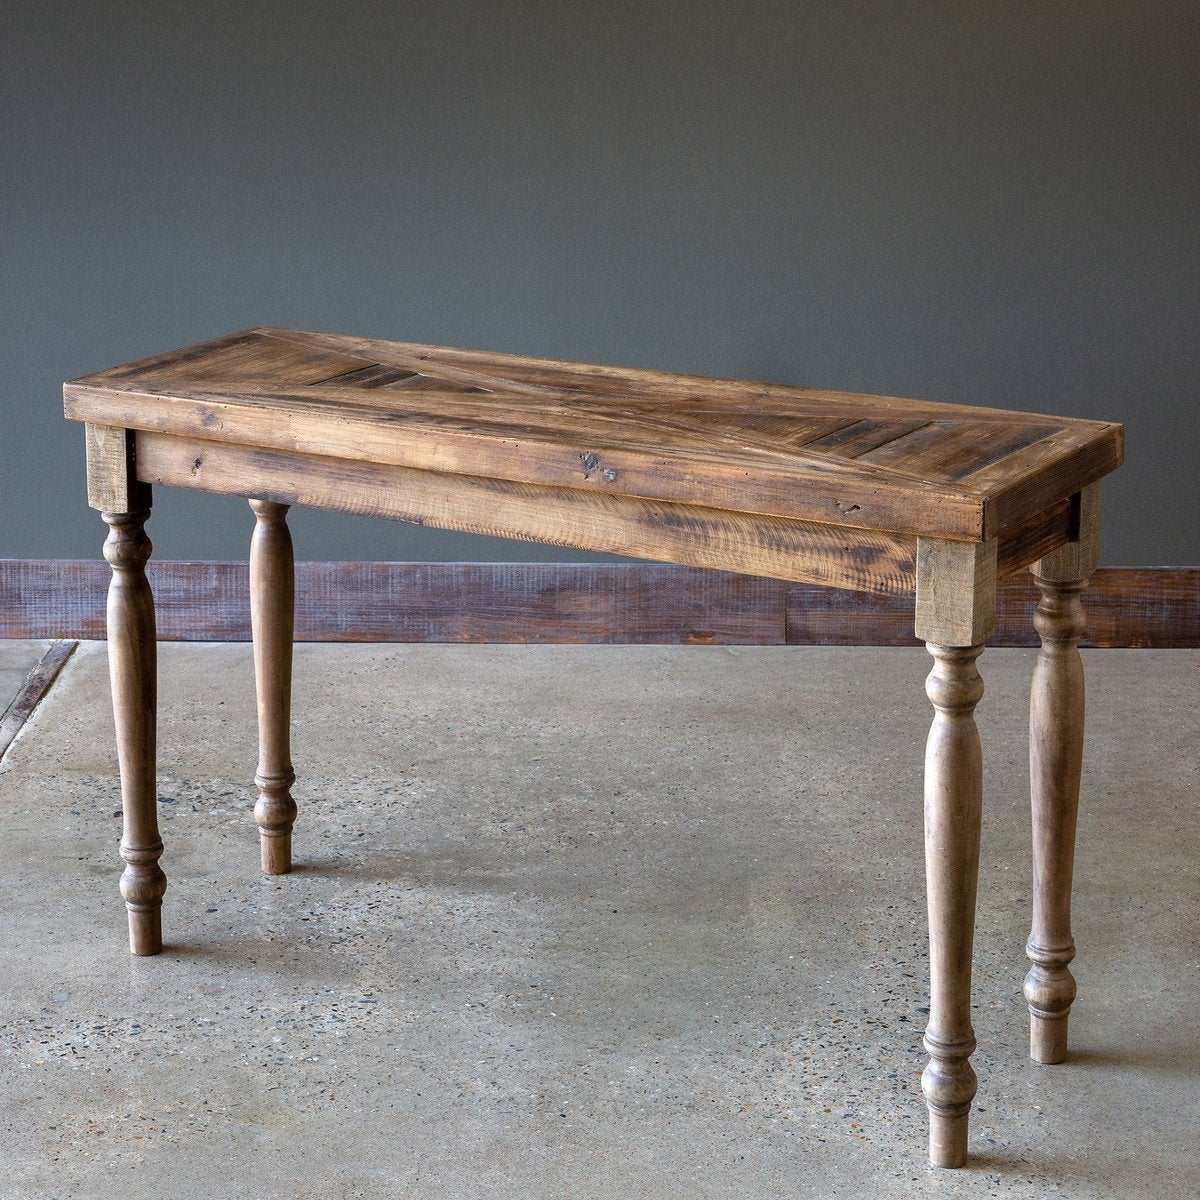 A Guide for Purchasing Reclaimed Wooden Furniture